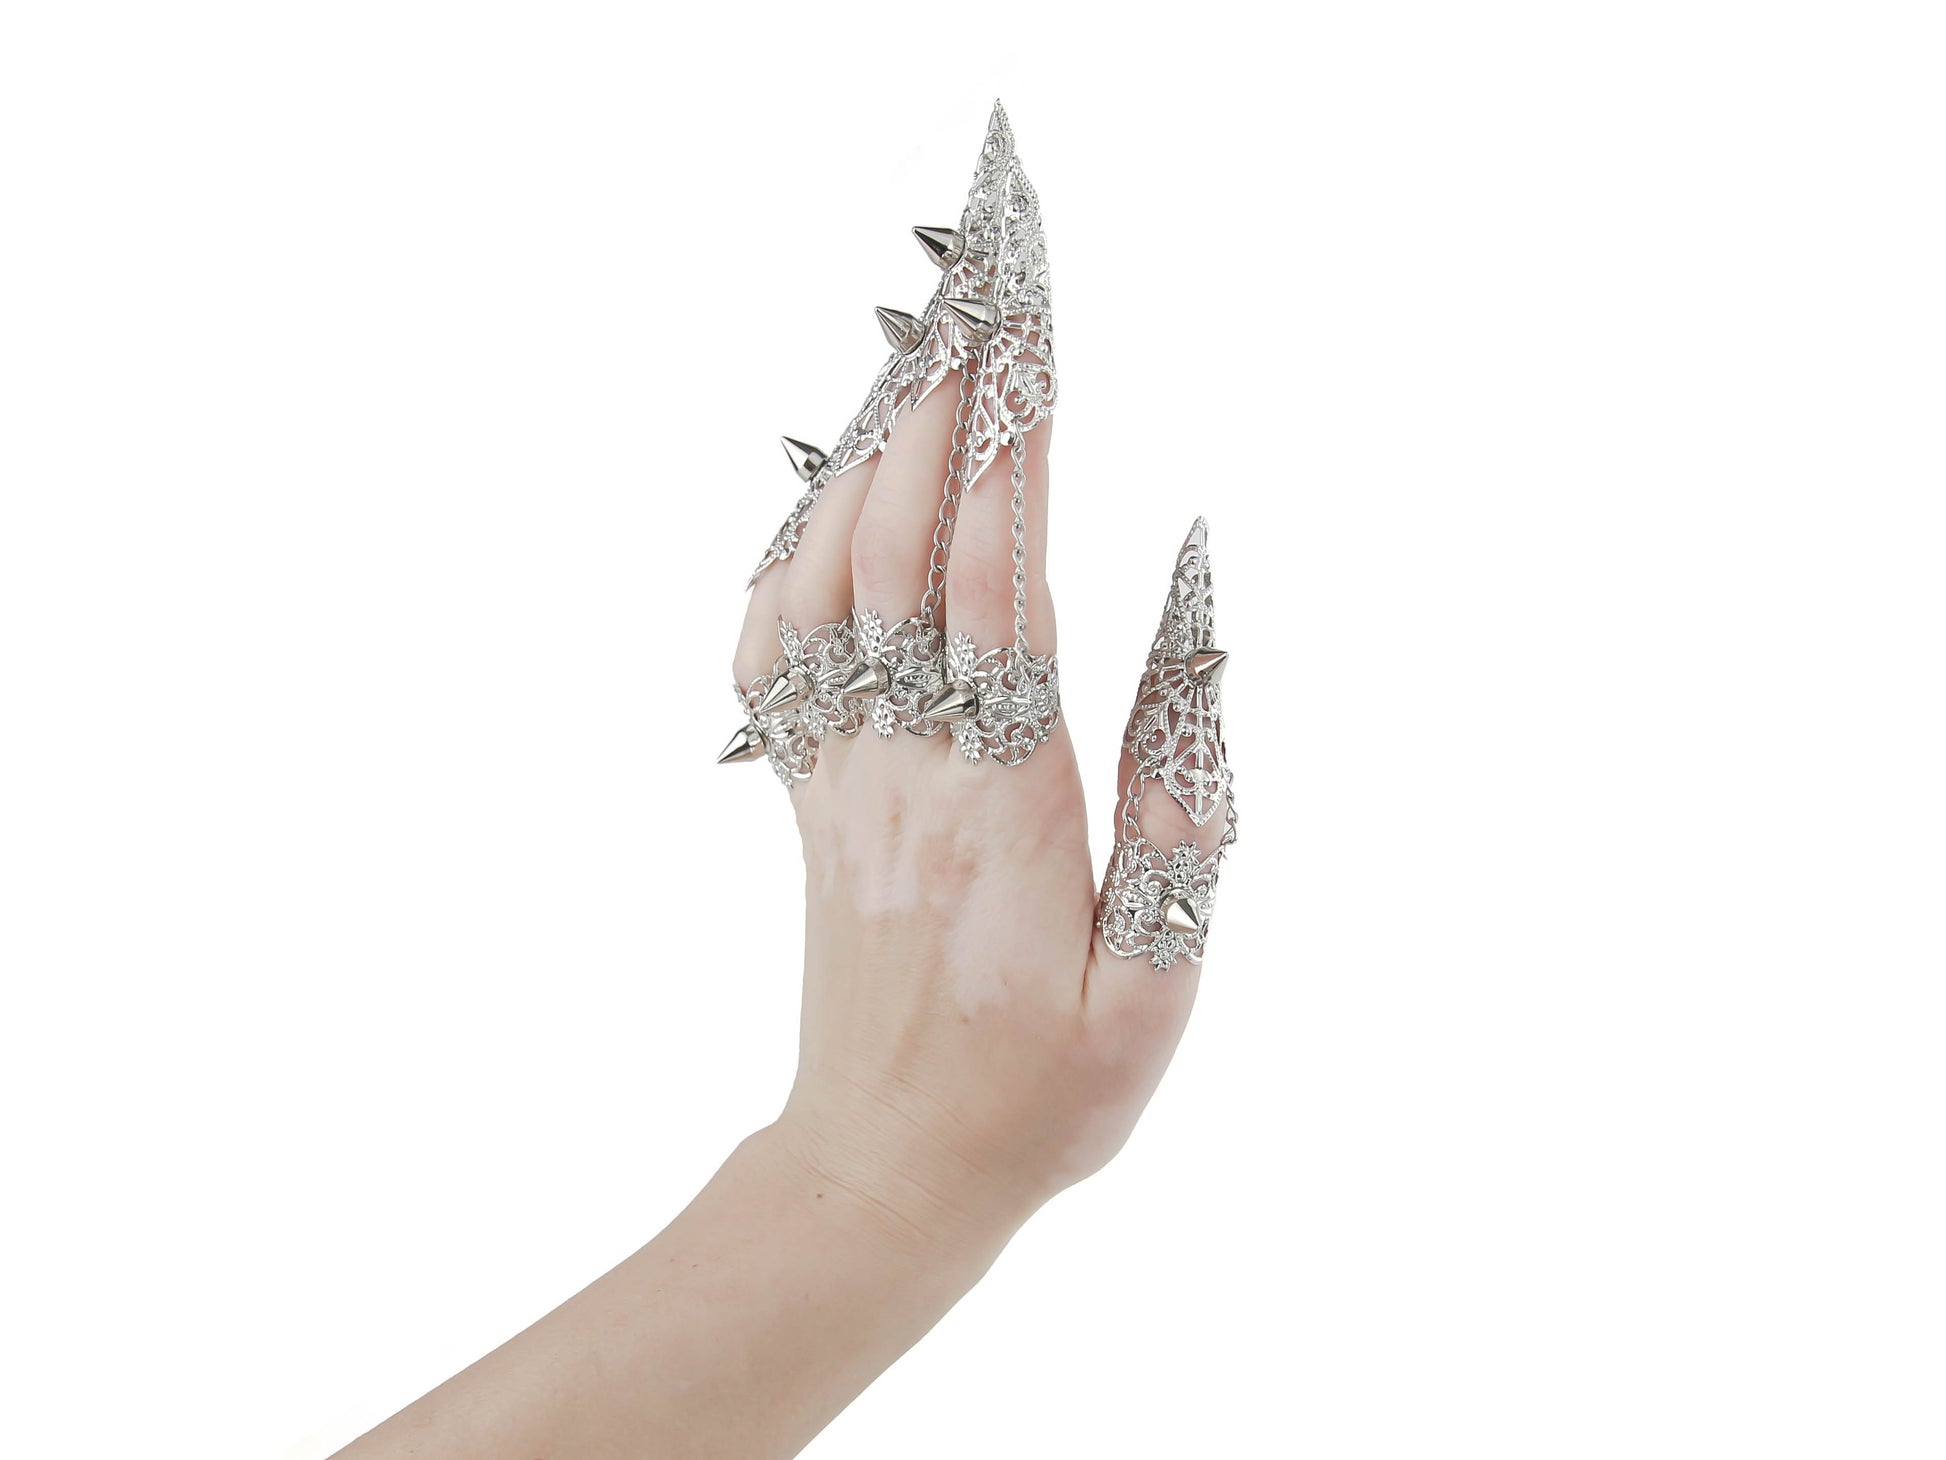 A hand is adorned with a striking set of Myril Jewels silver claw rings, featuring delicate filigree and bold studs. These pieces embody the essence of neo-gothic luxury, perfect for anyone looking to add a touch of dark, avant-garde elegance to their Halloween or everyday gothic-chic style.